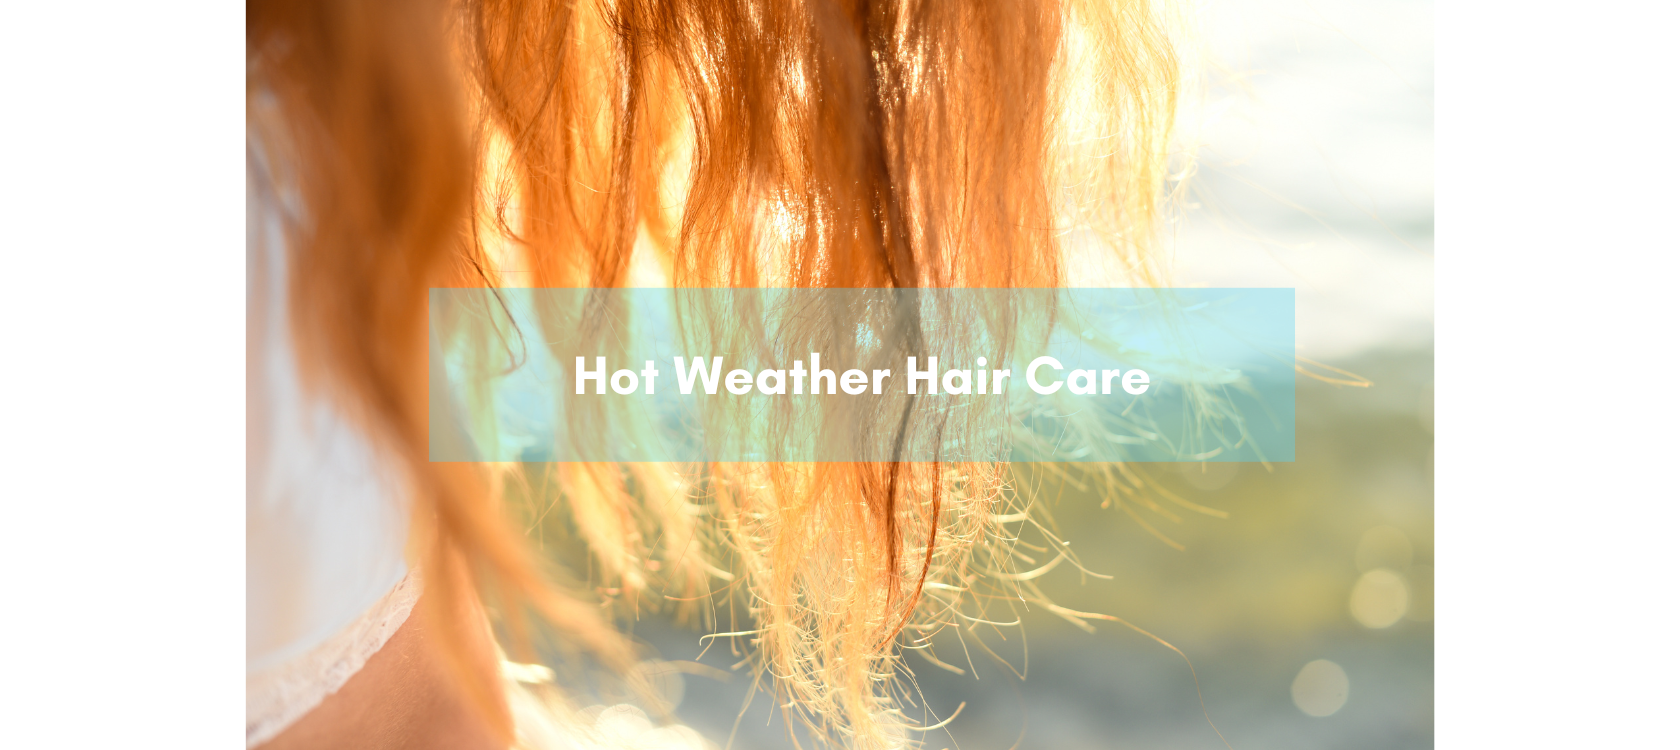 Hot Weather Hair Care